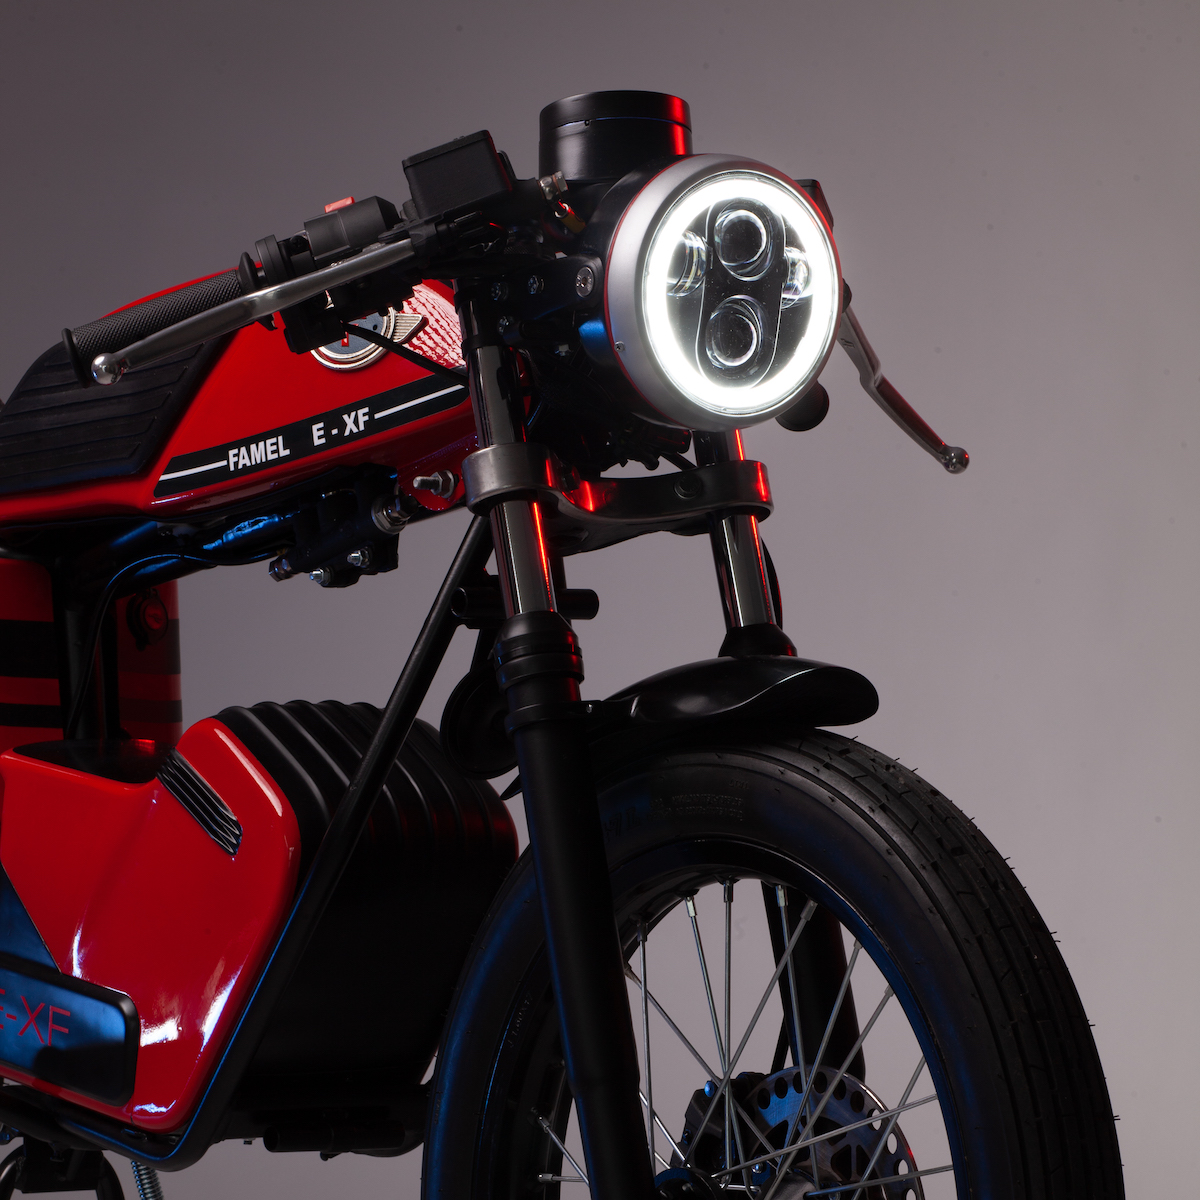 Famel motorcycle company reborn with beautiful electric cafe racer